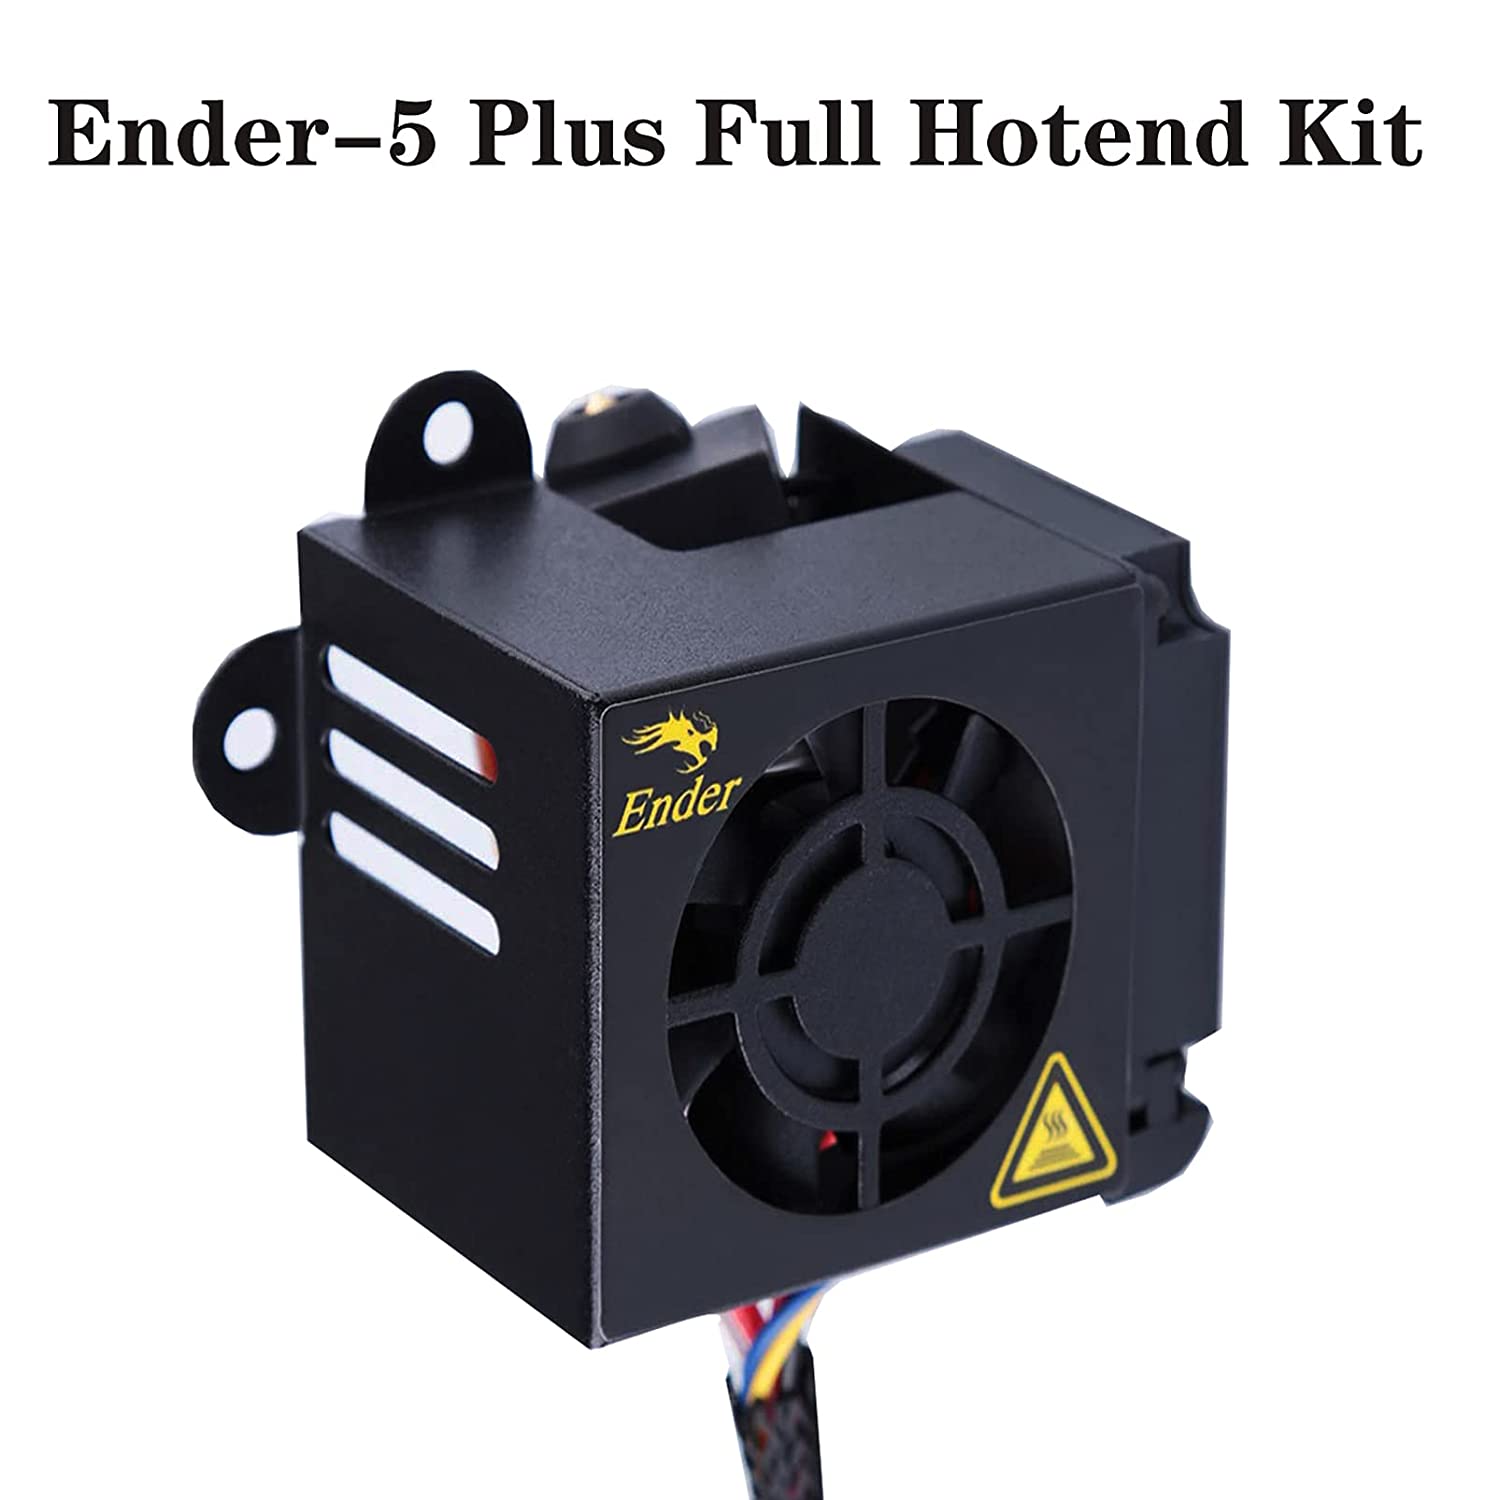 Creality Ender 5 Plus Fully Assembled Hotend Kit with 0.4mm Nozzle